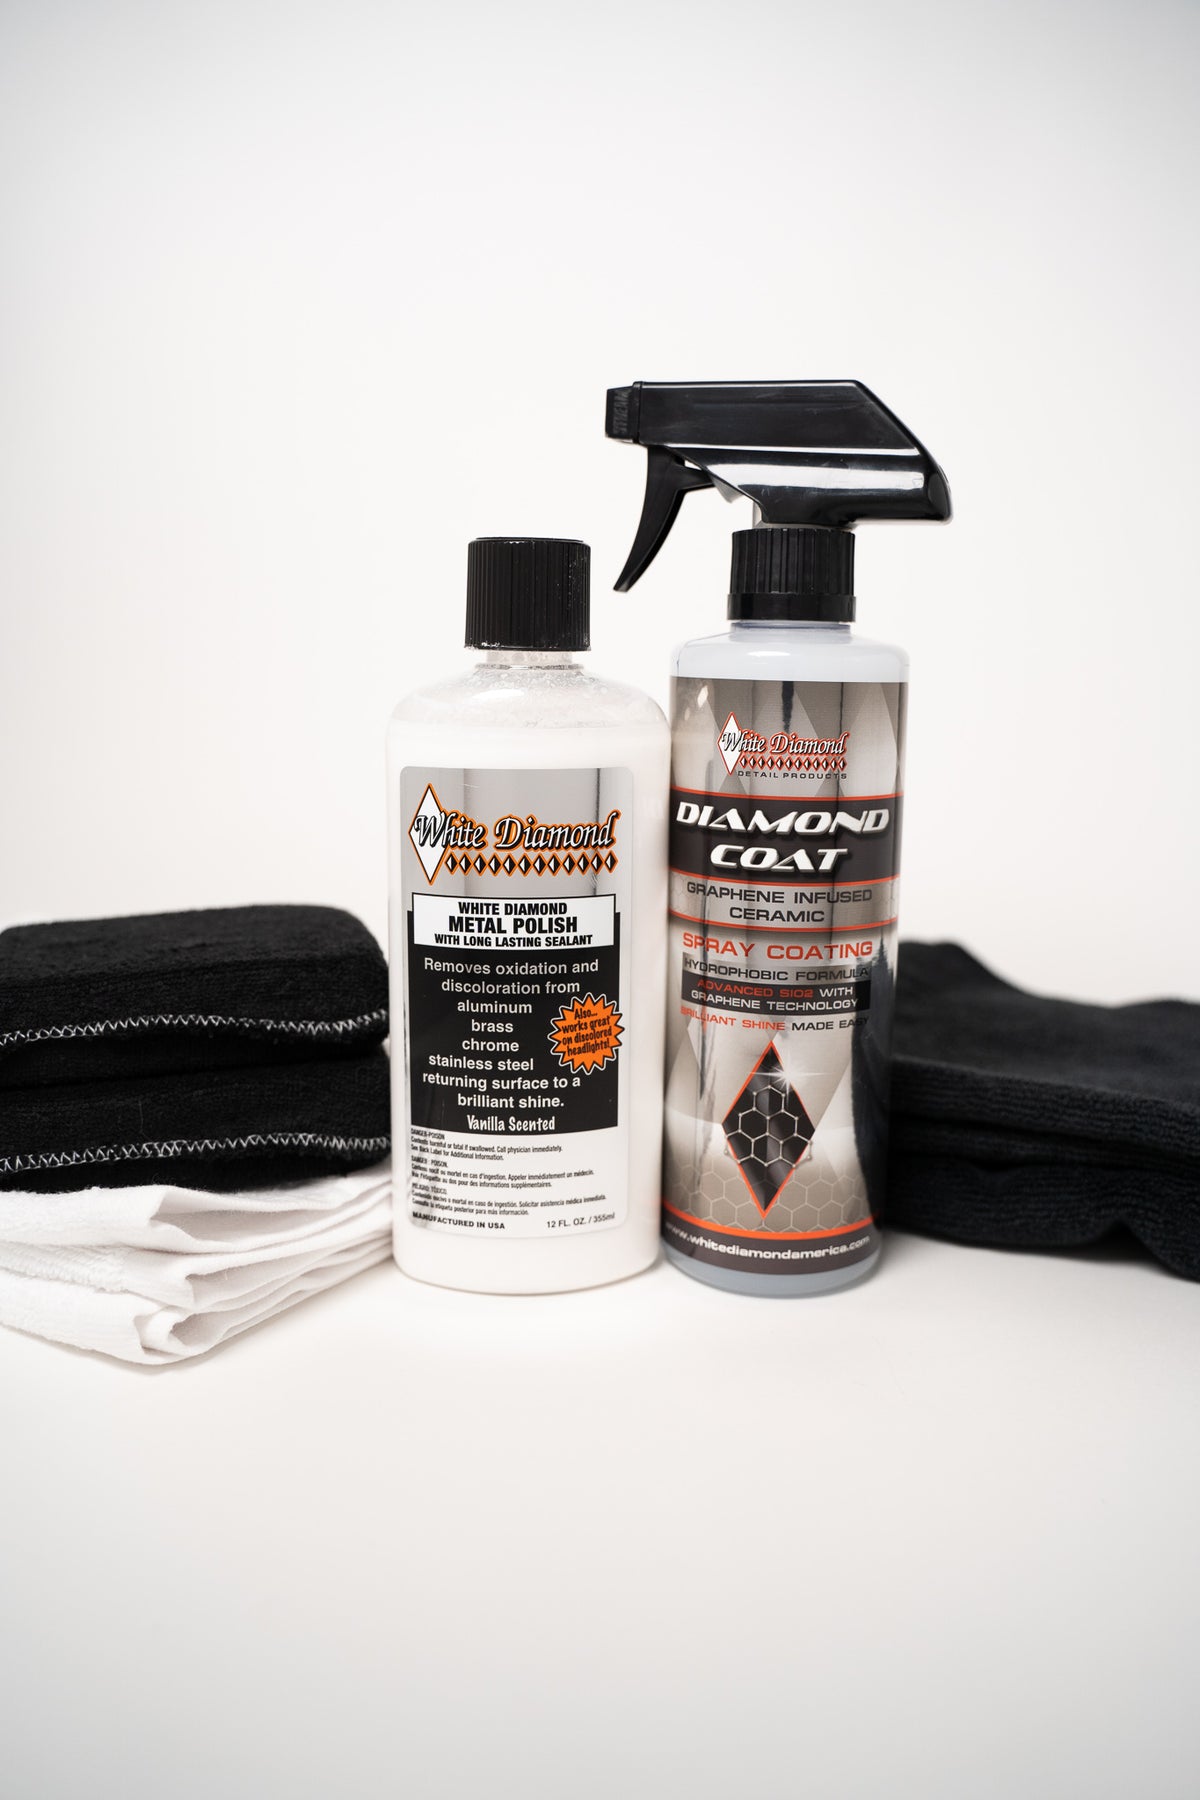 White Diamond Metal Polish with Long Lasting Sealant, Wipe (12 Wipes) is a  Cleaner and Polisher All in one. Removes Oxidation and Discoloration from